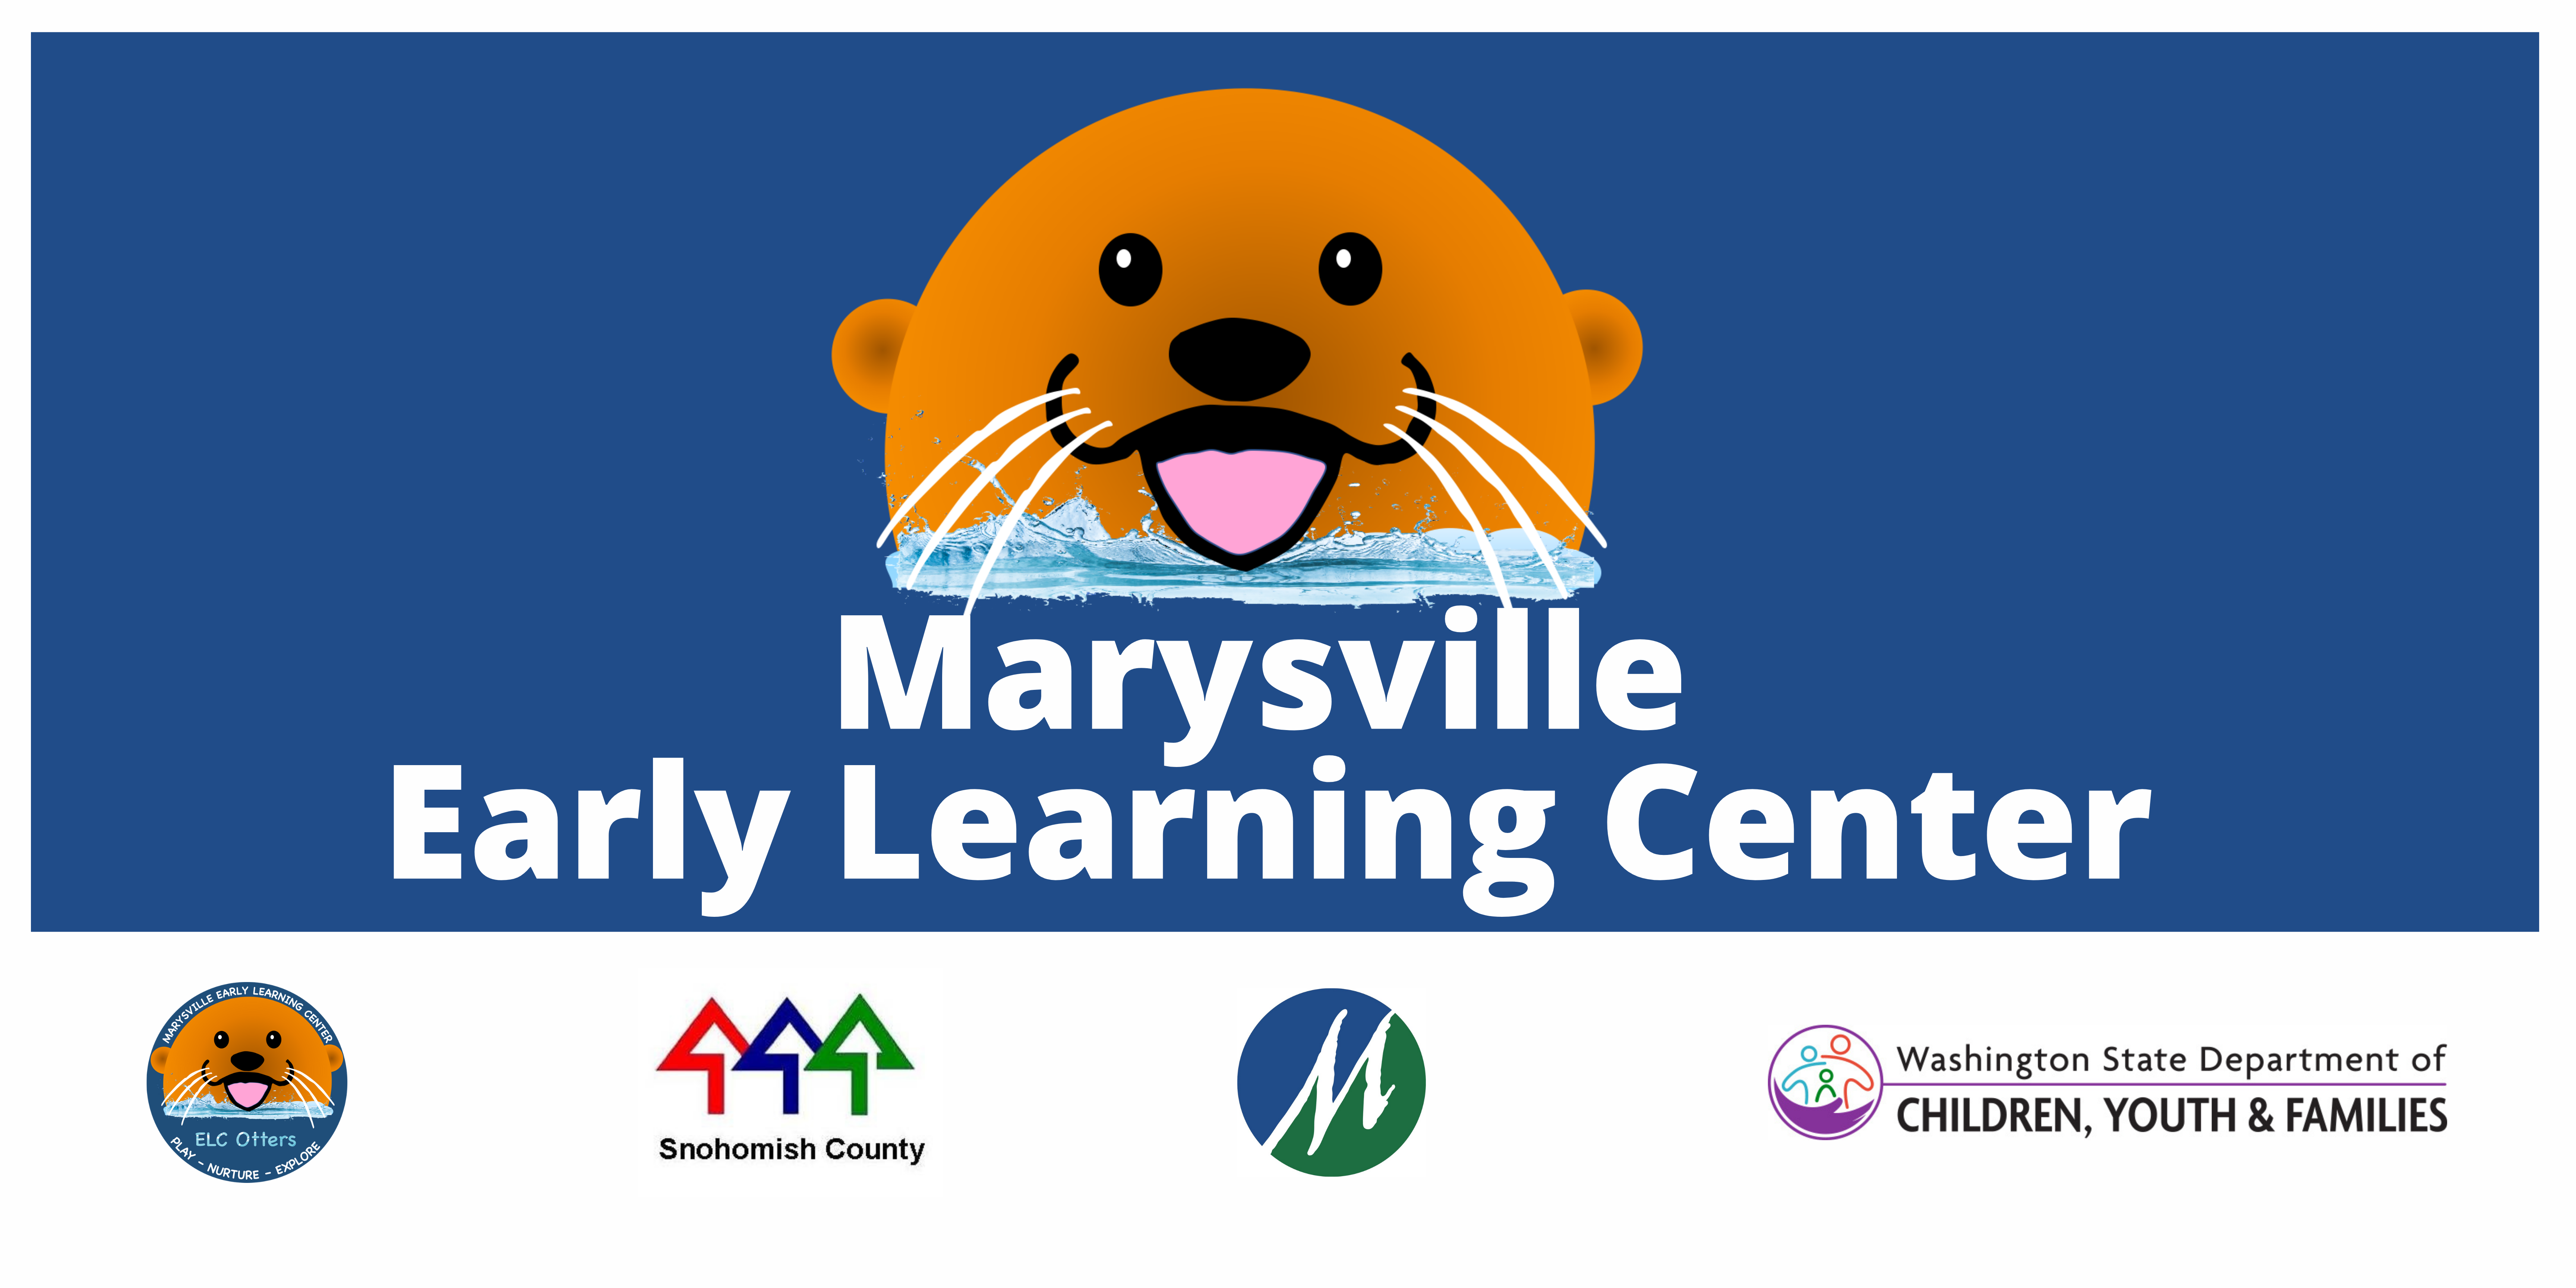 Marysville School District Early Learning Center